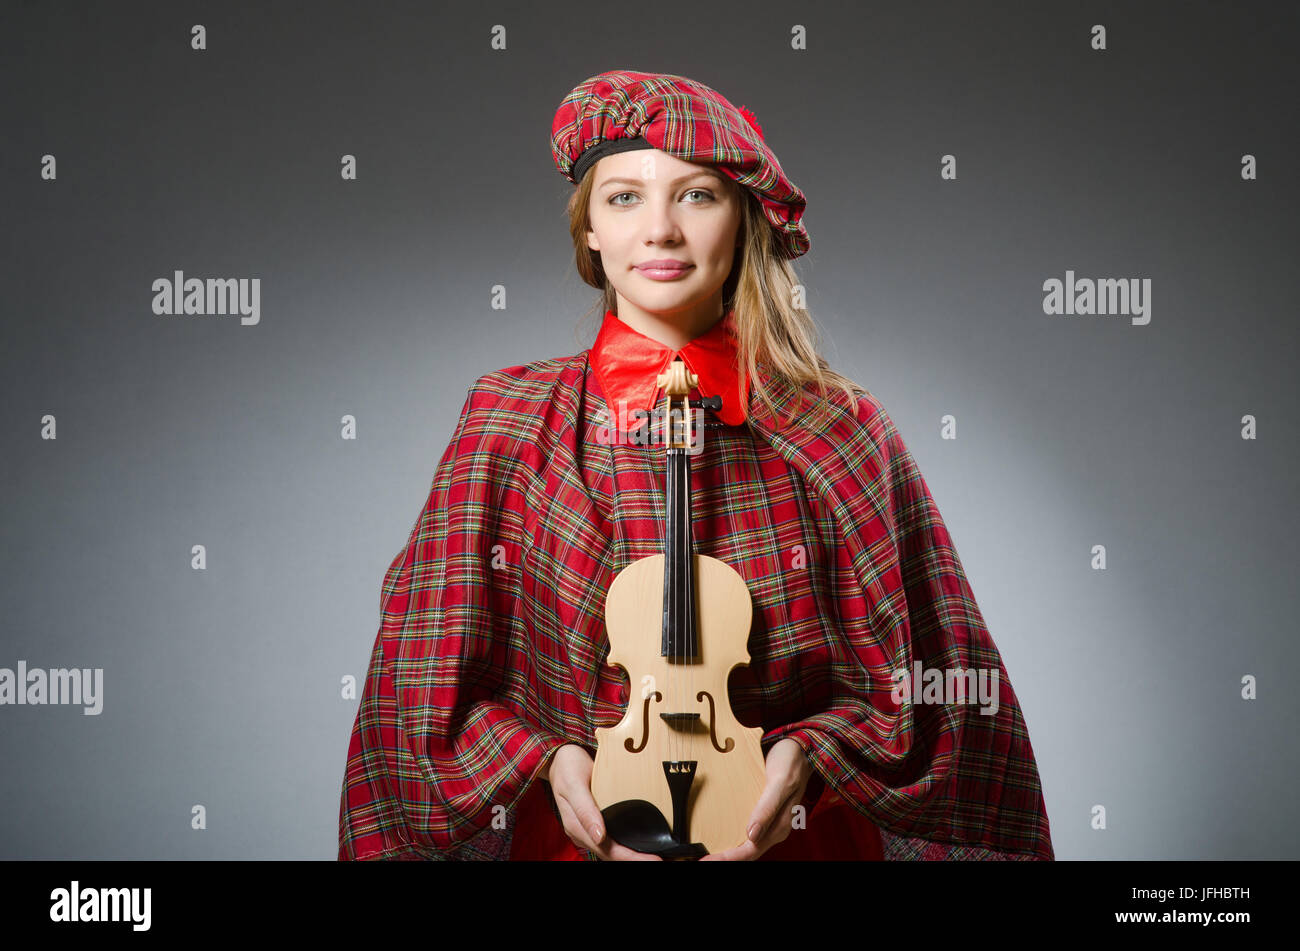 Woman in scottish clothing in musical concept Stock Photo